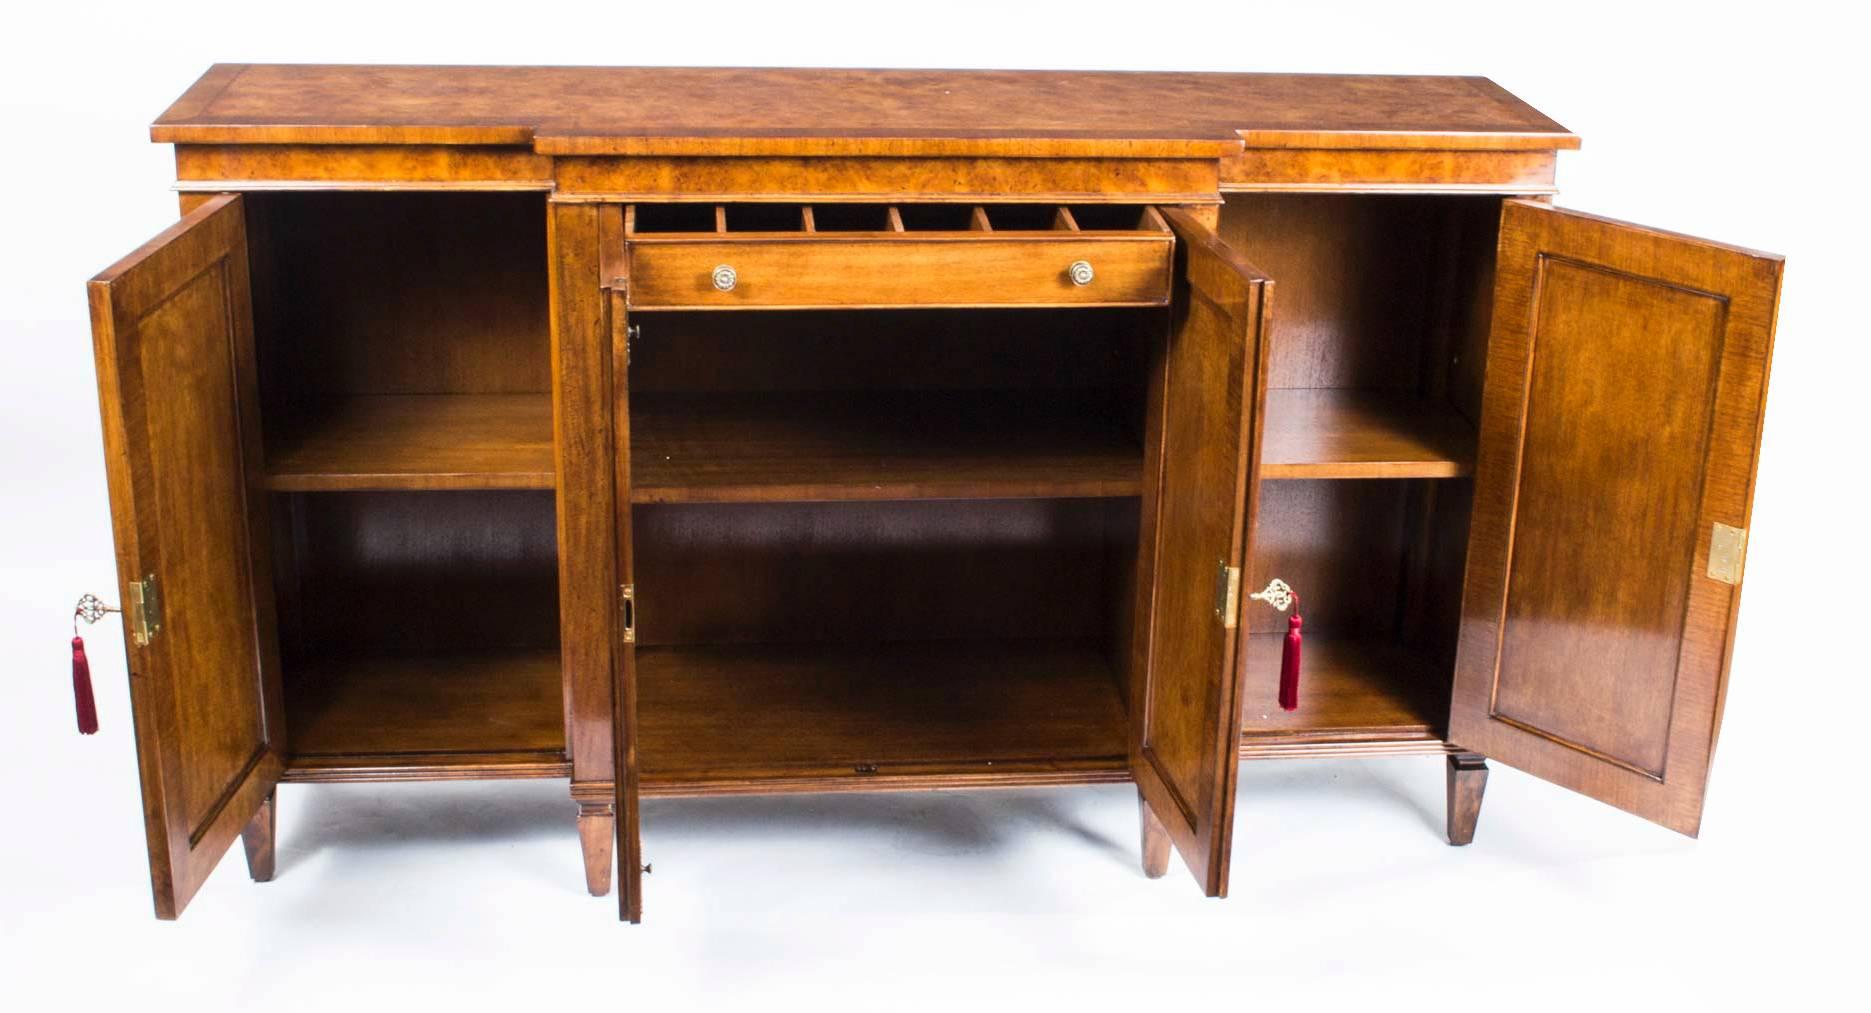 This is a wonderful breakfront burr walnut sideboard with room for all your plates, china, glassware and cutlery, dating from the last quarter of the 20th century.

It has four doors and that open to reveal a central drawer, for cutlery, etc. and